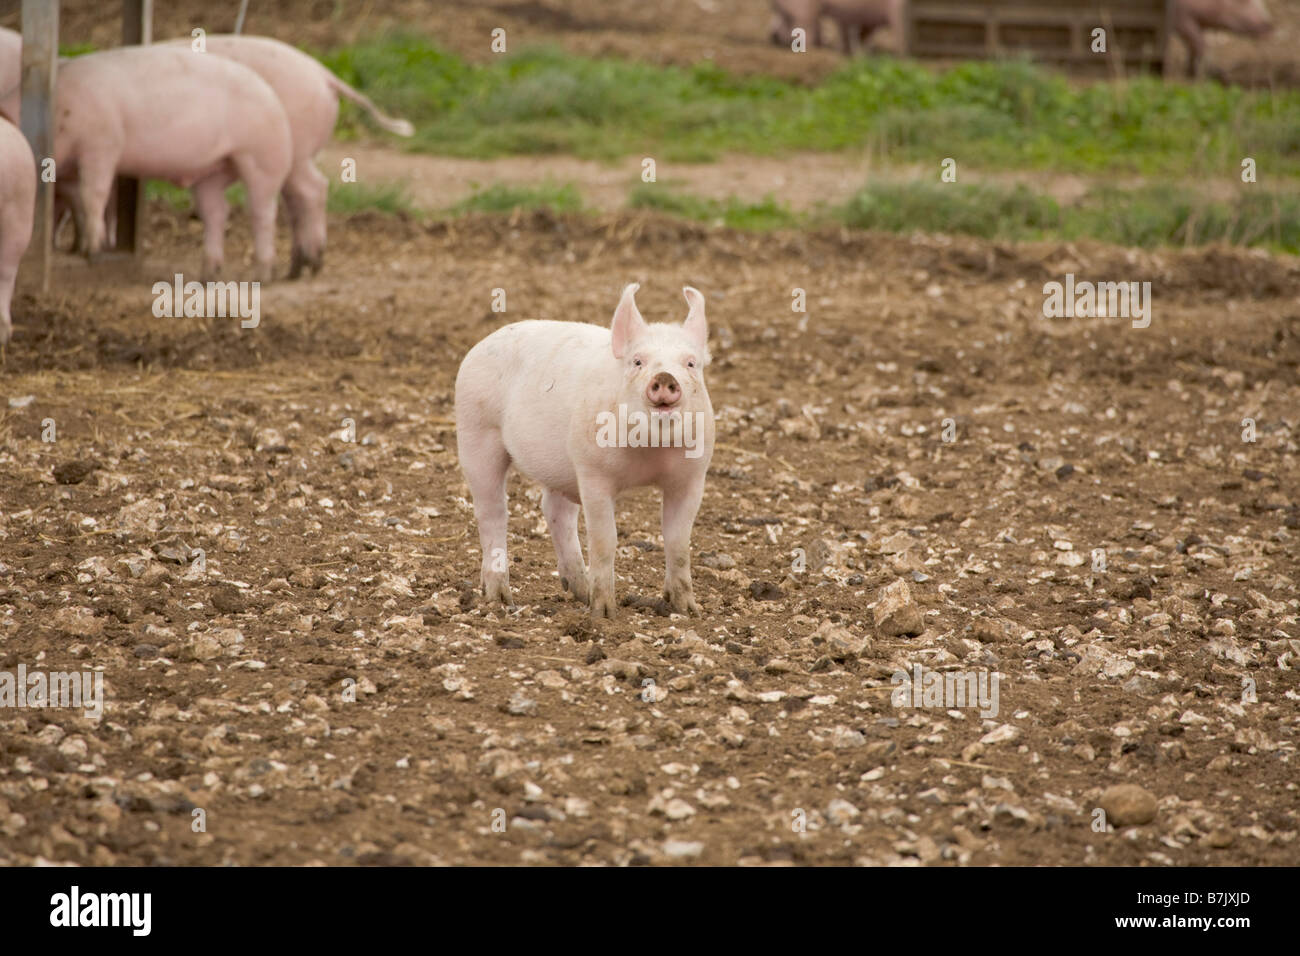 Pig farm with ark shelters Stock Photo